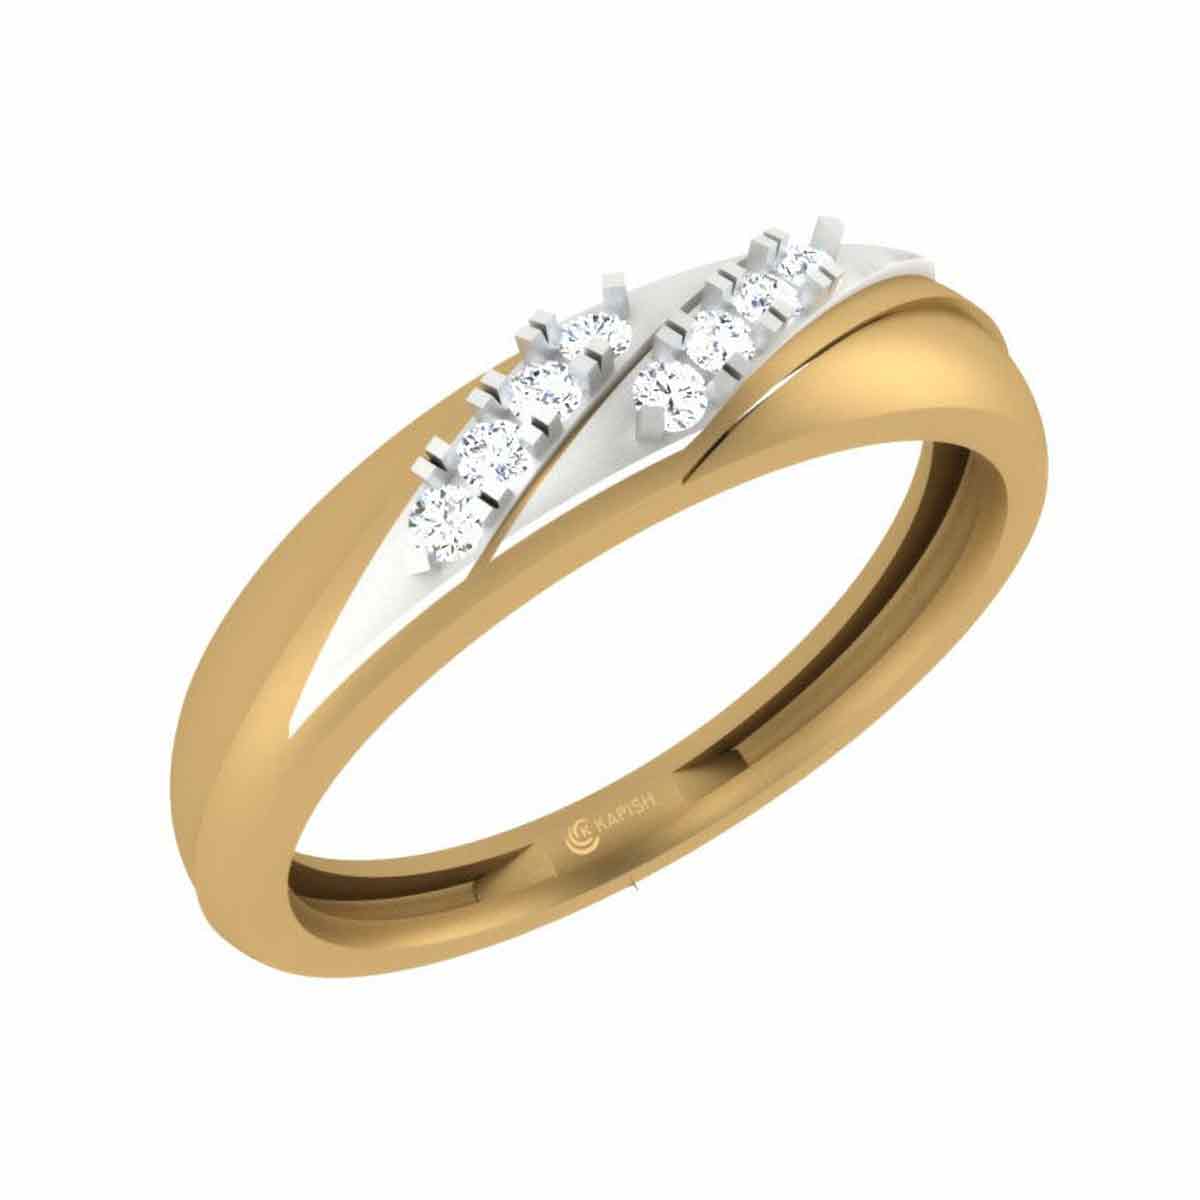 98% Golden Silver Double Layour Diamond Ring, Weight: 25g at Rs 90000 in  Mumbai